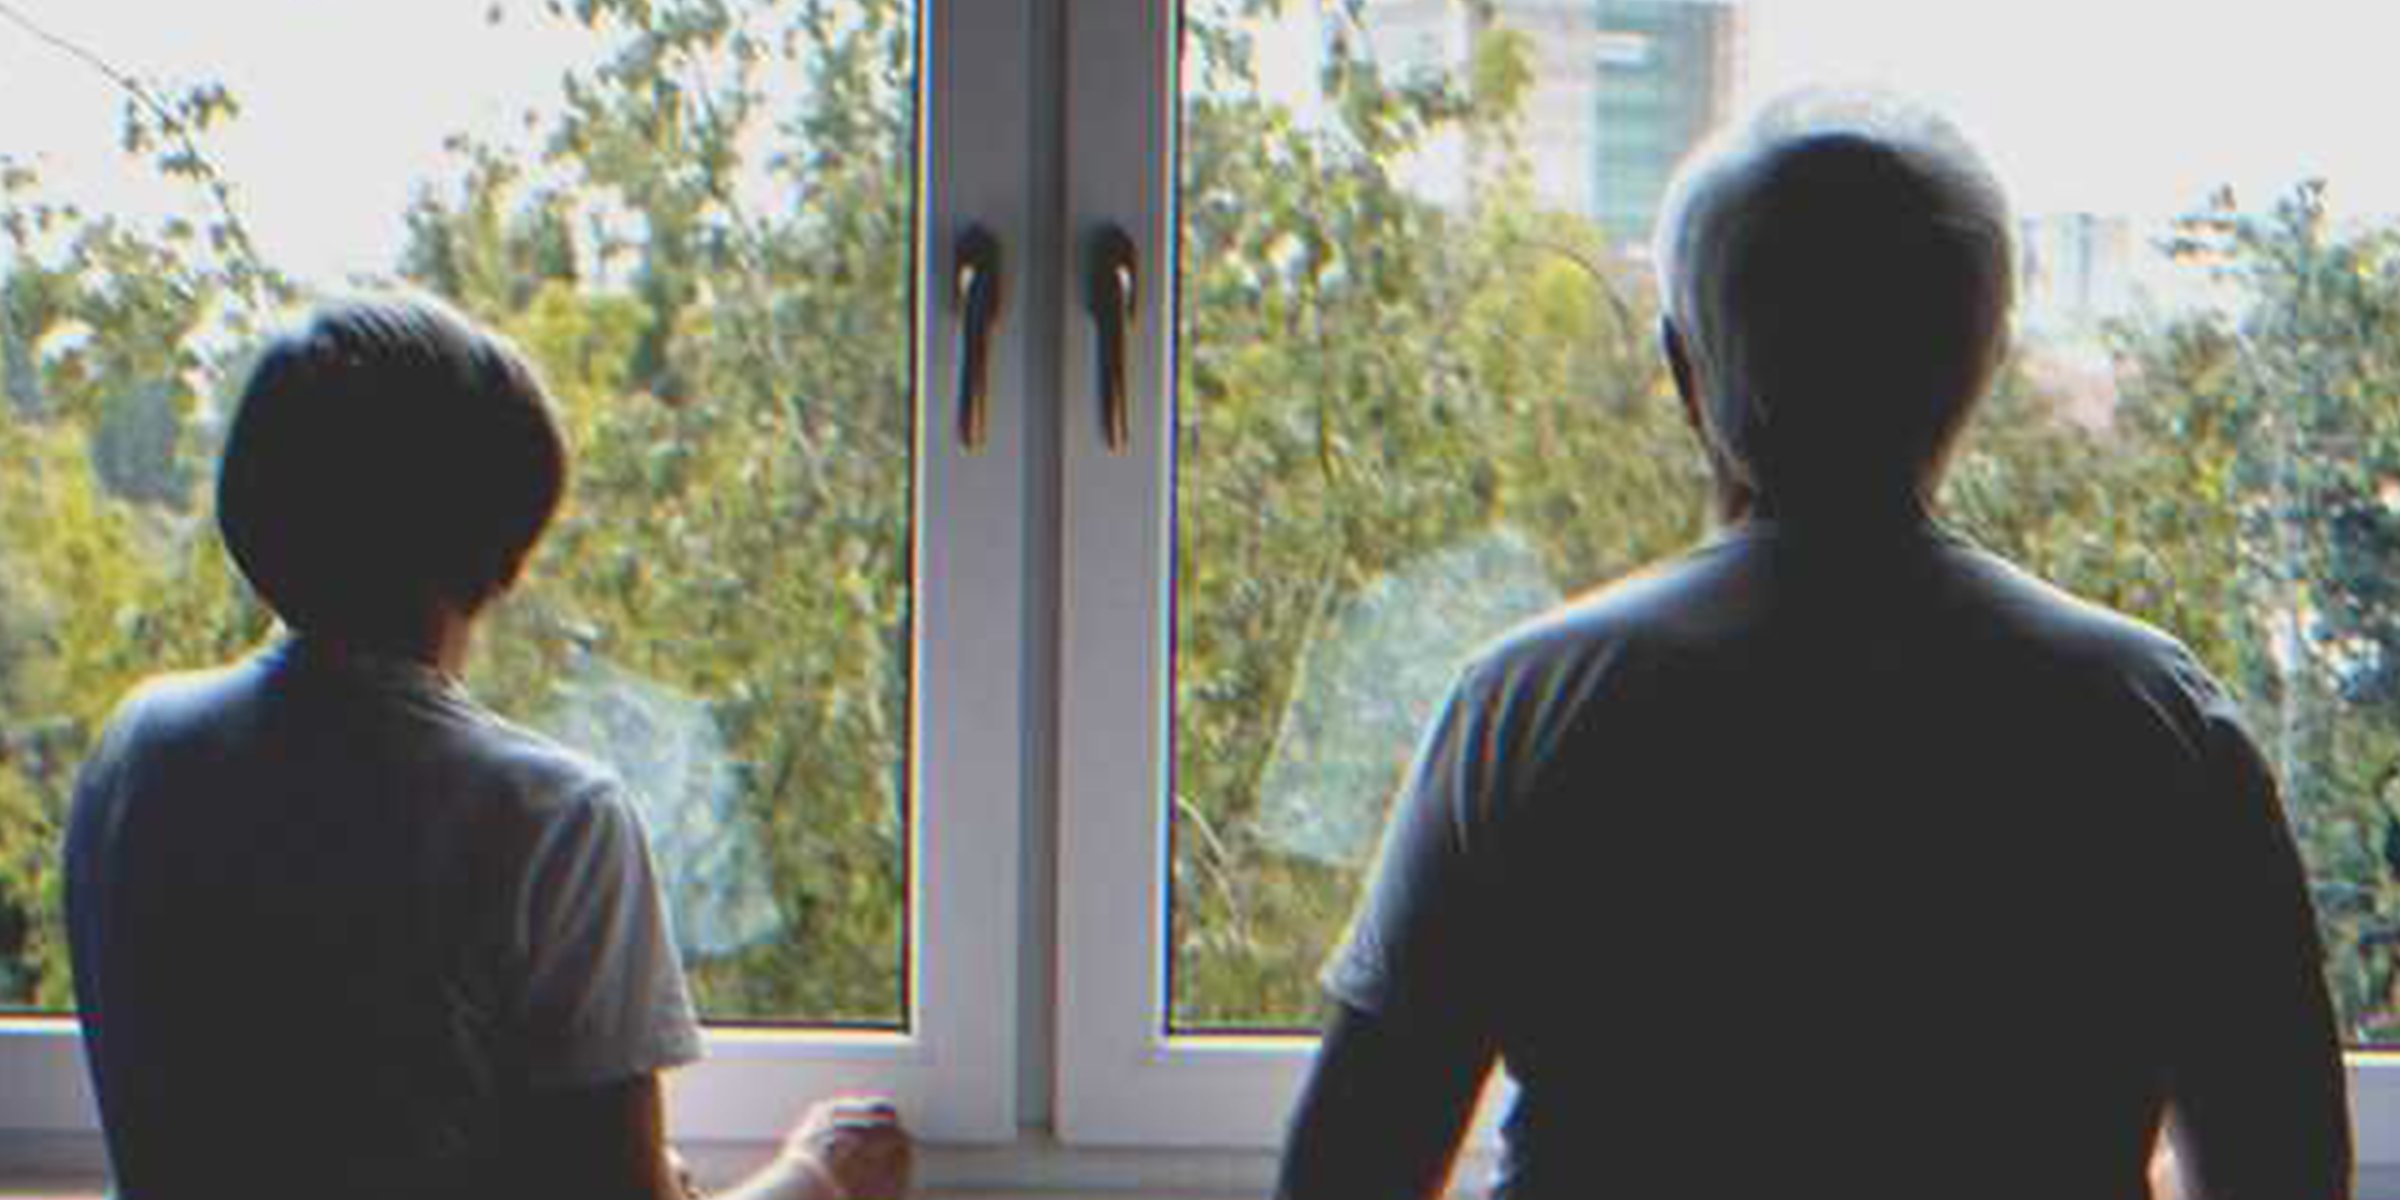 An old couple looking out the window | Source: Shutterstock